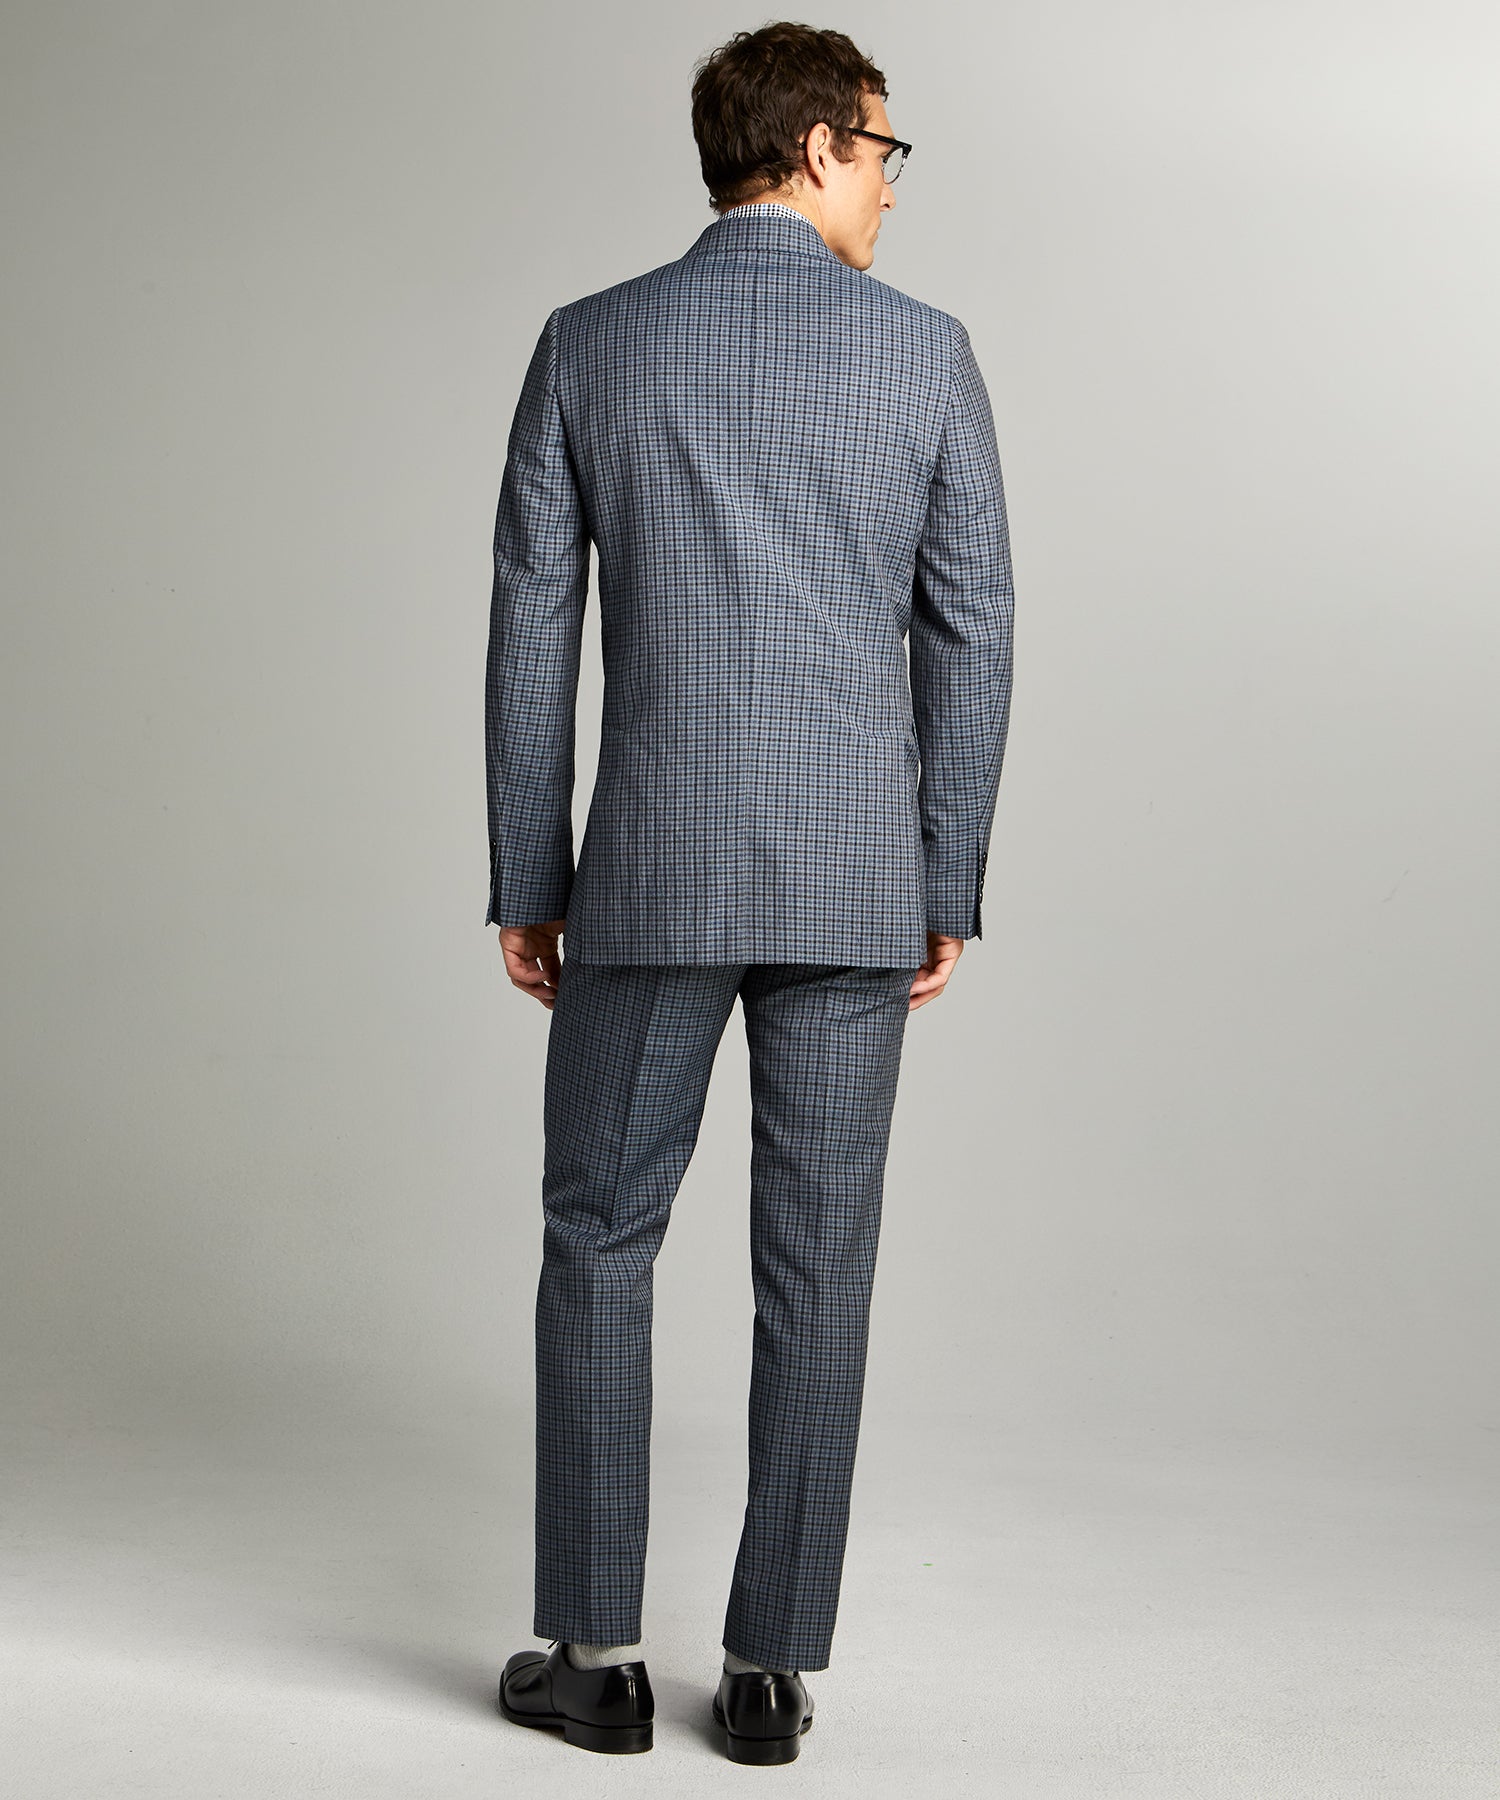 Sutton Wool Linen Suit in Grey Navy Check - Todd Snyder